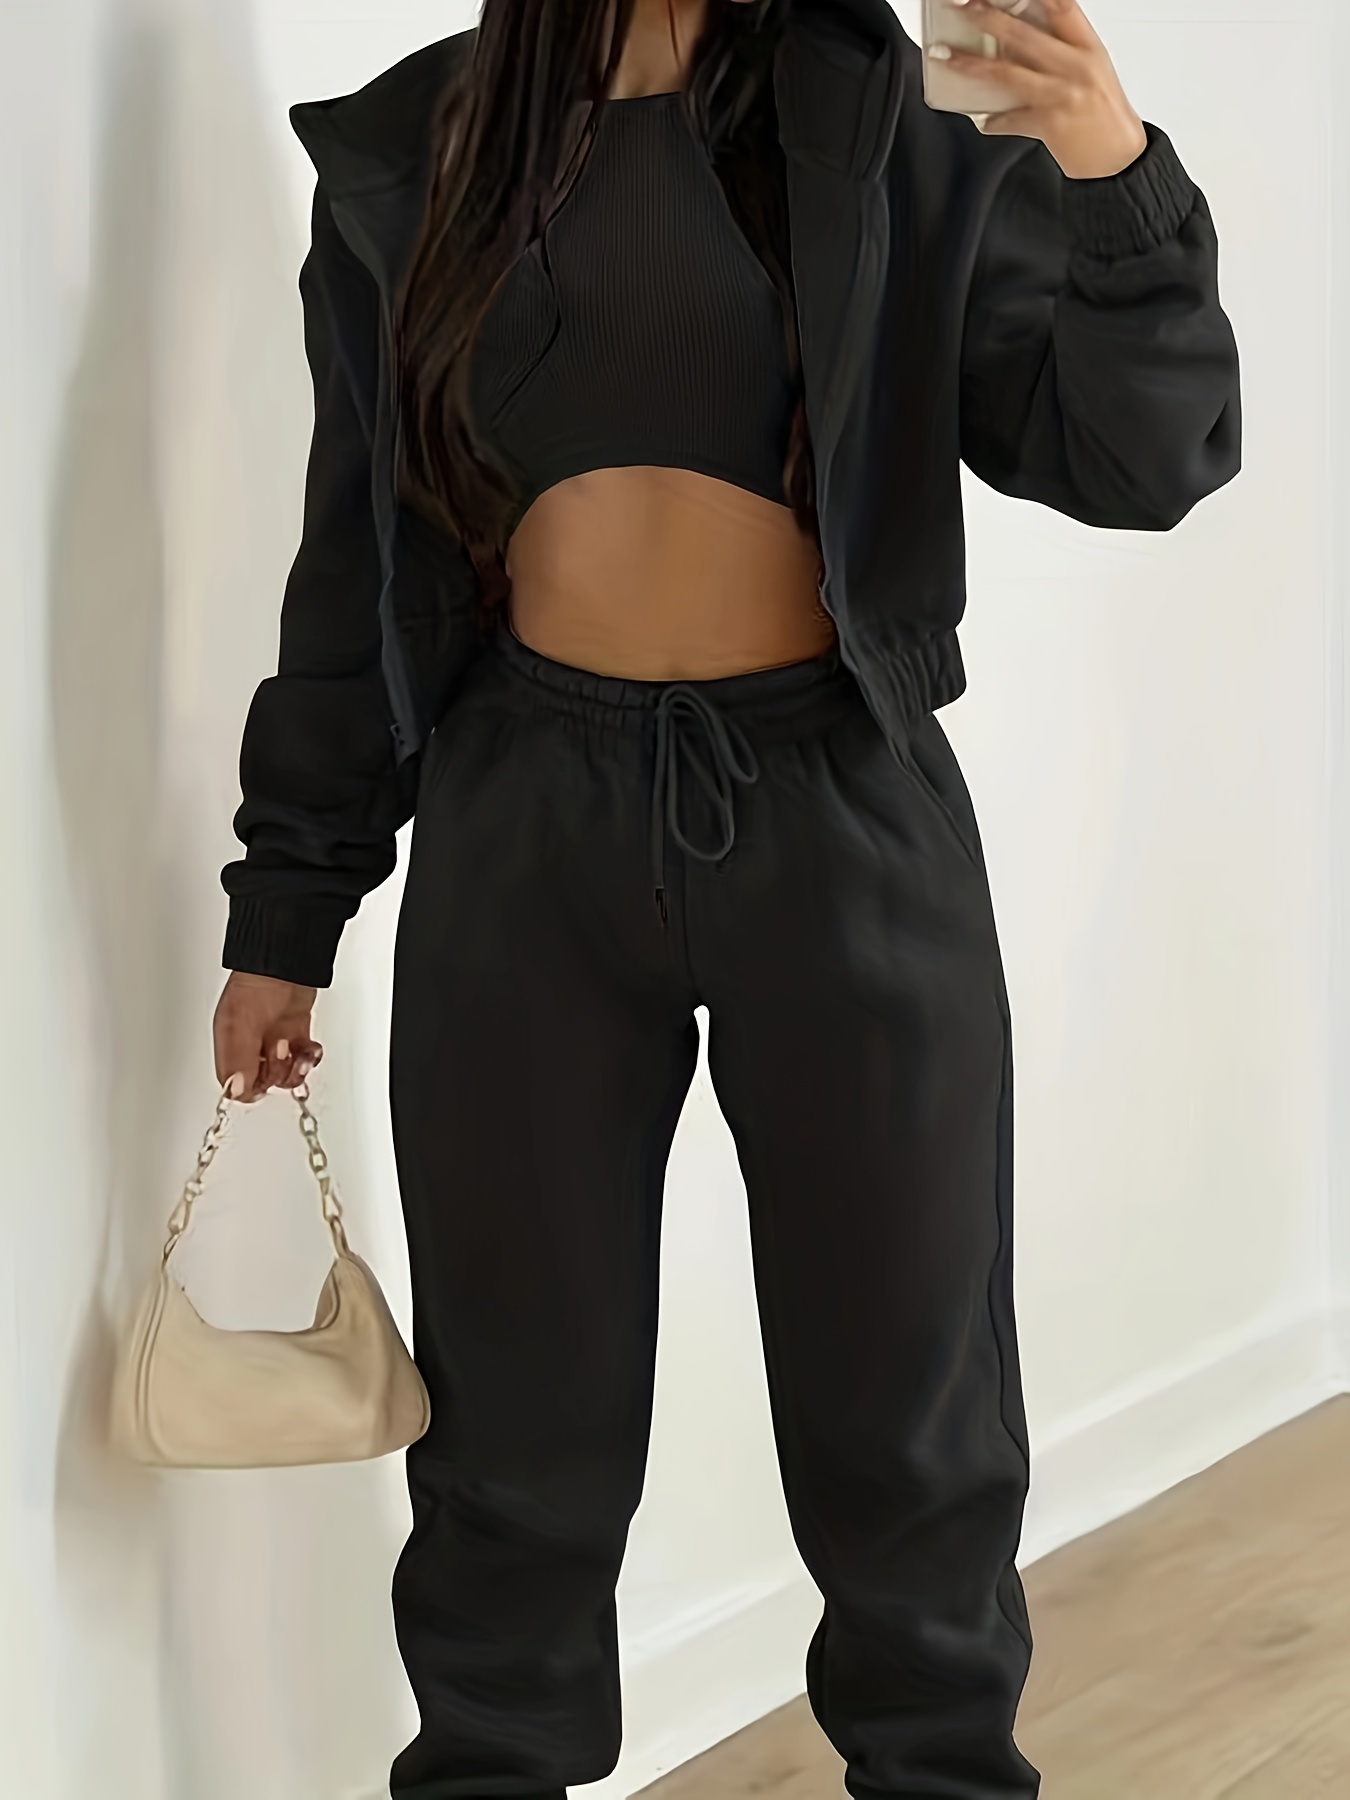 Women 3 Piece Sets Casual Long Sleeve Zip Hoodies+Ribbed Tank+High Waist  Sweatpants Jogger Pant Suits Sporty Three Pieces Outfit